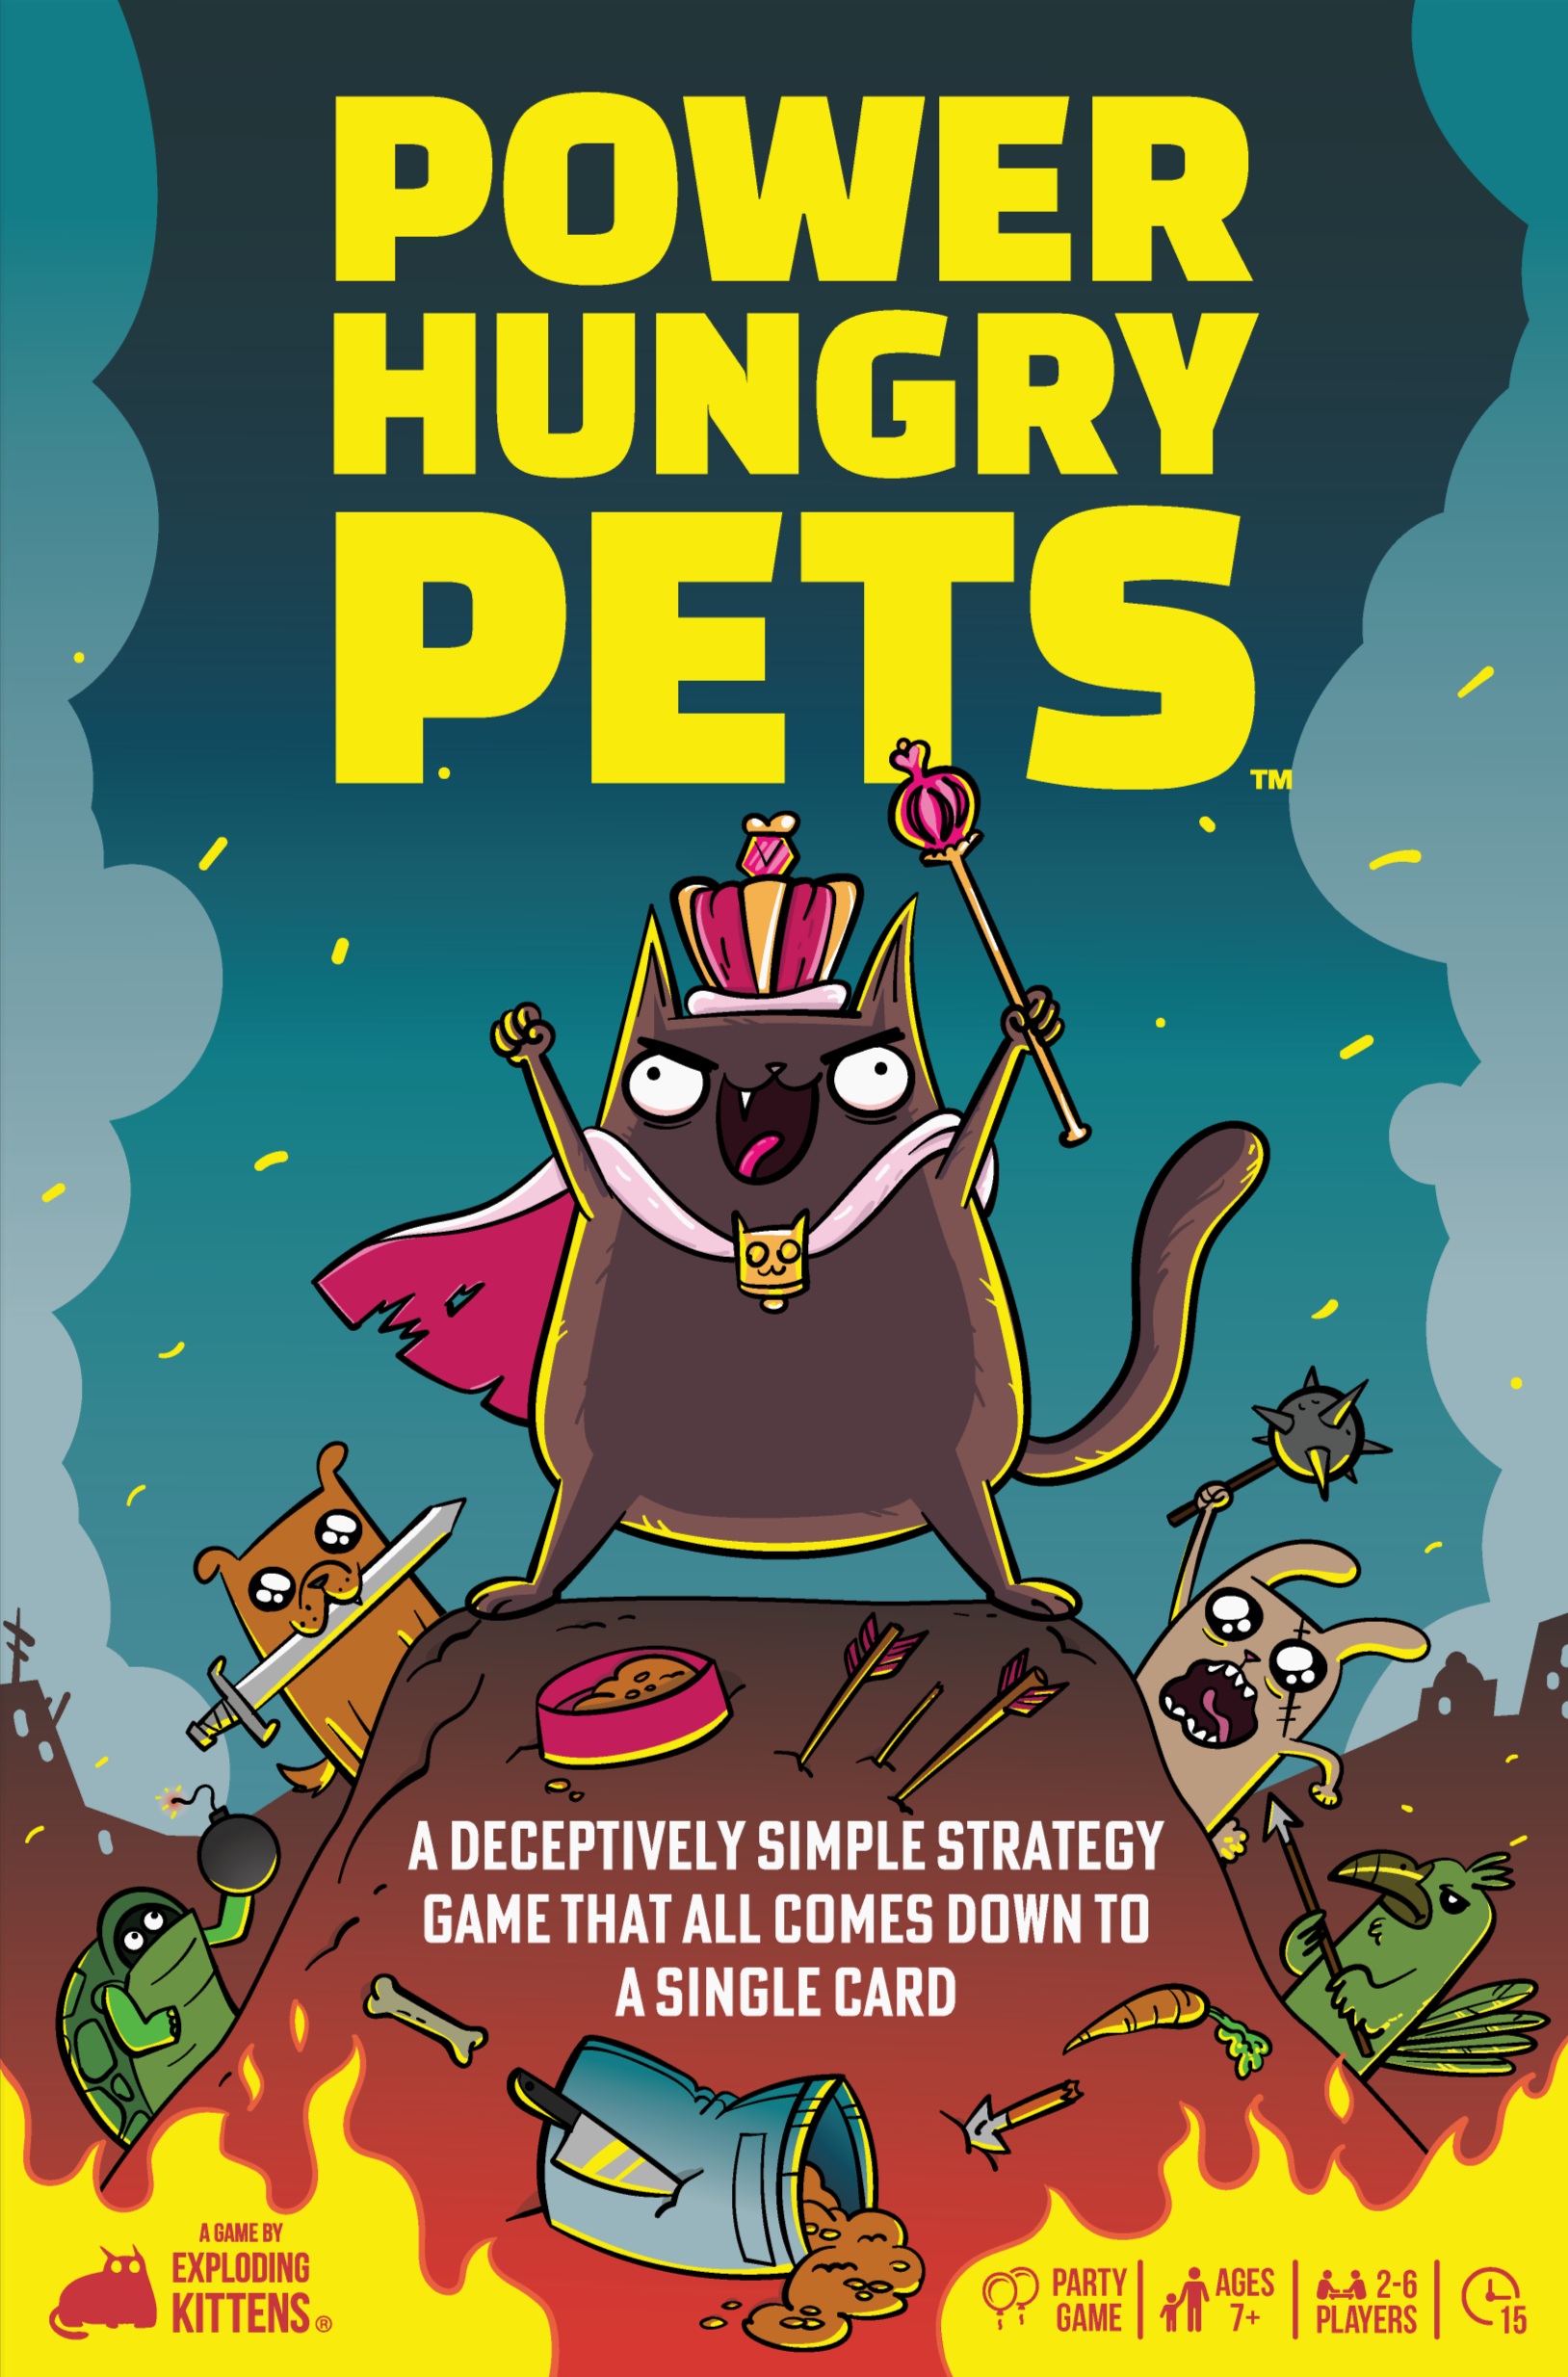 POWER HUNGRY PETS | The CG Realm